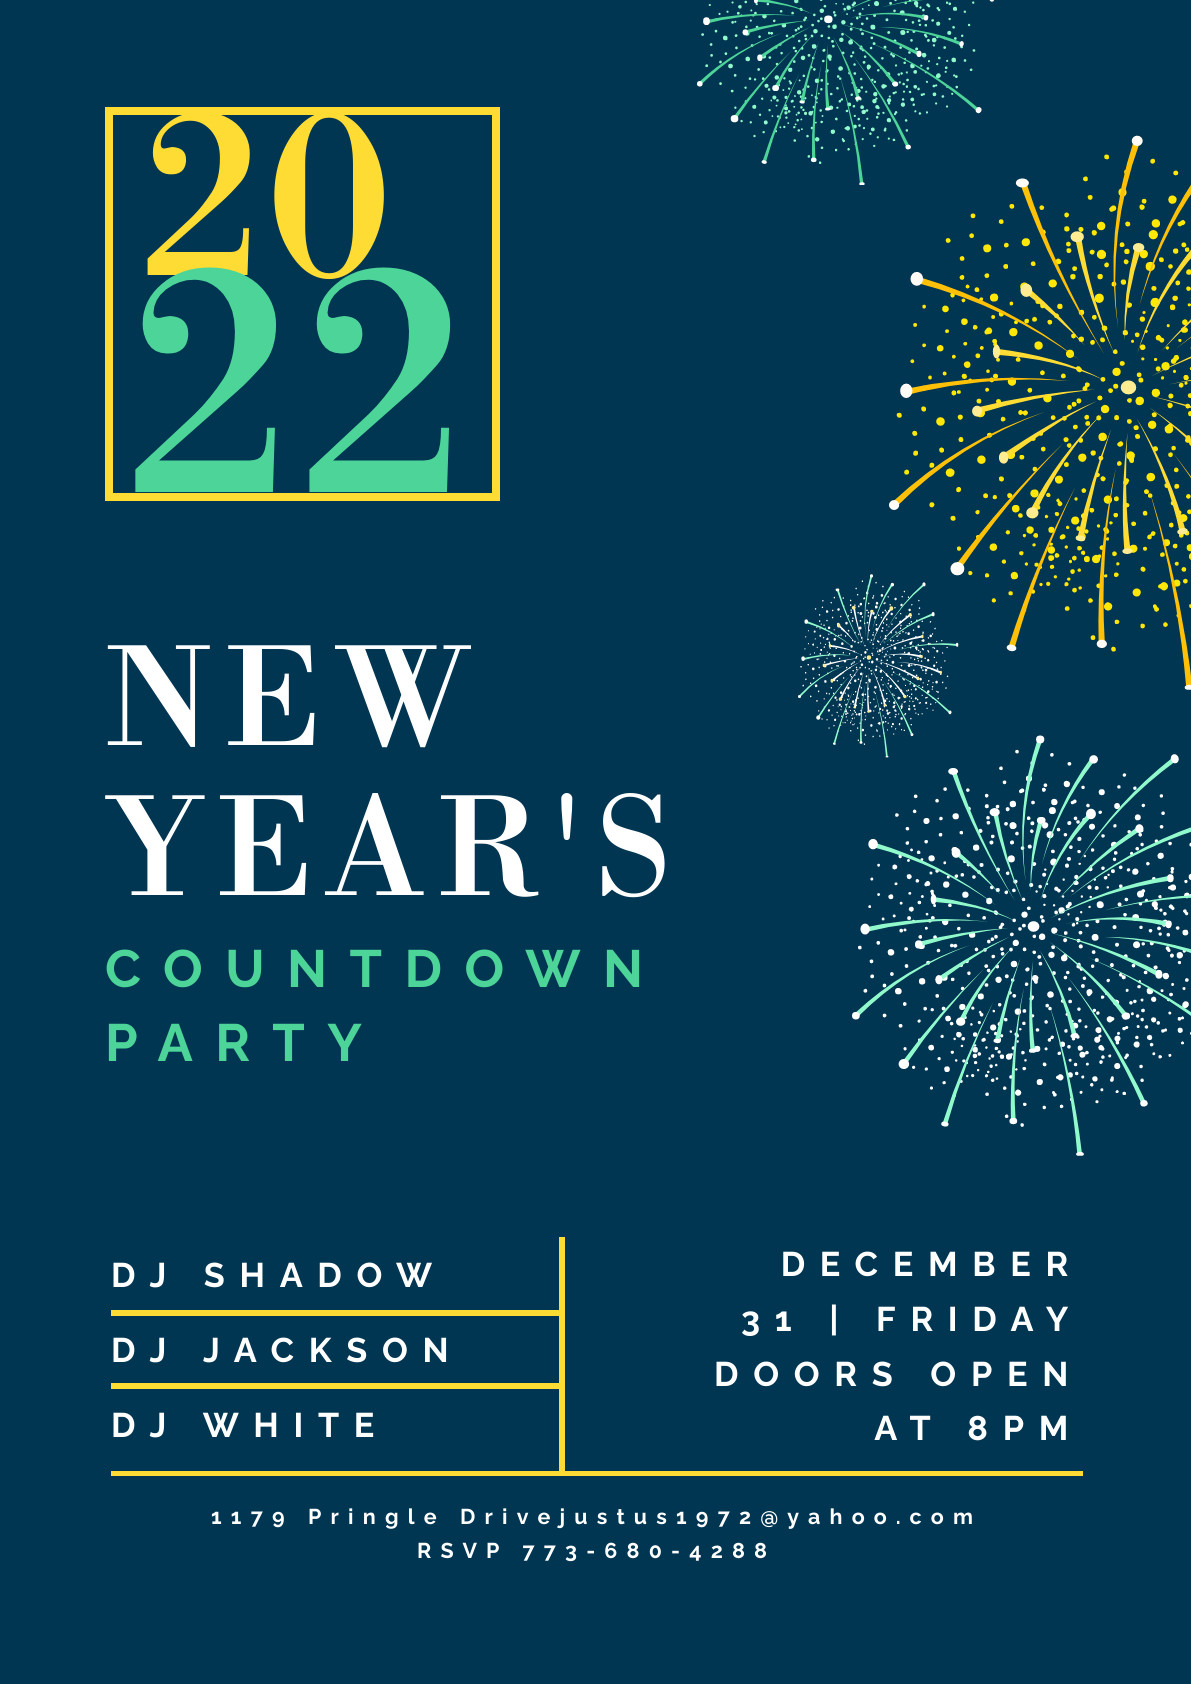 2022 New Year's Countdown Party Poster